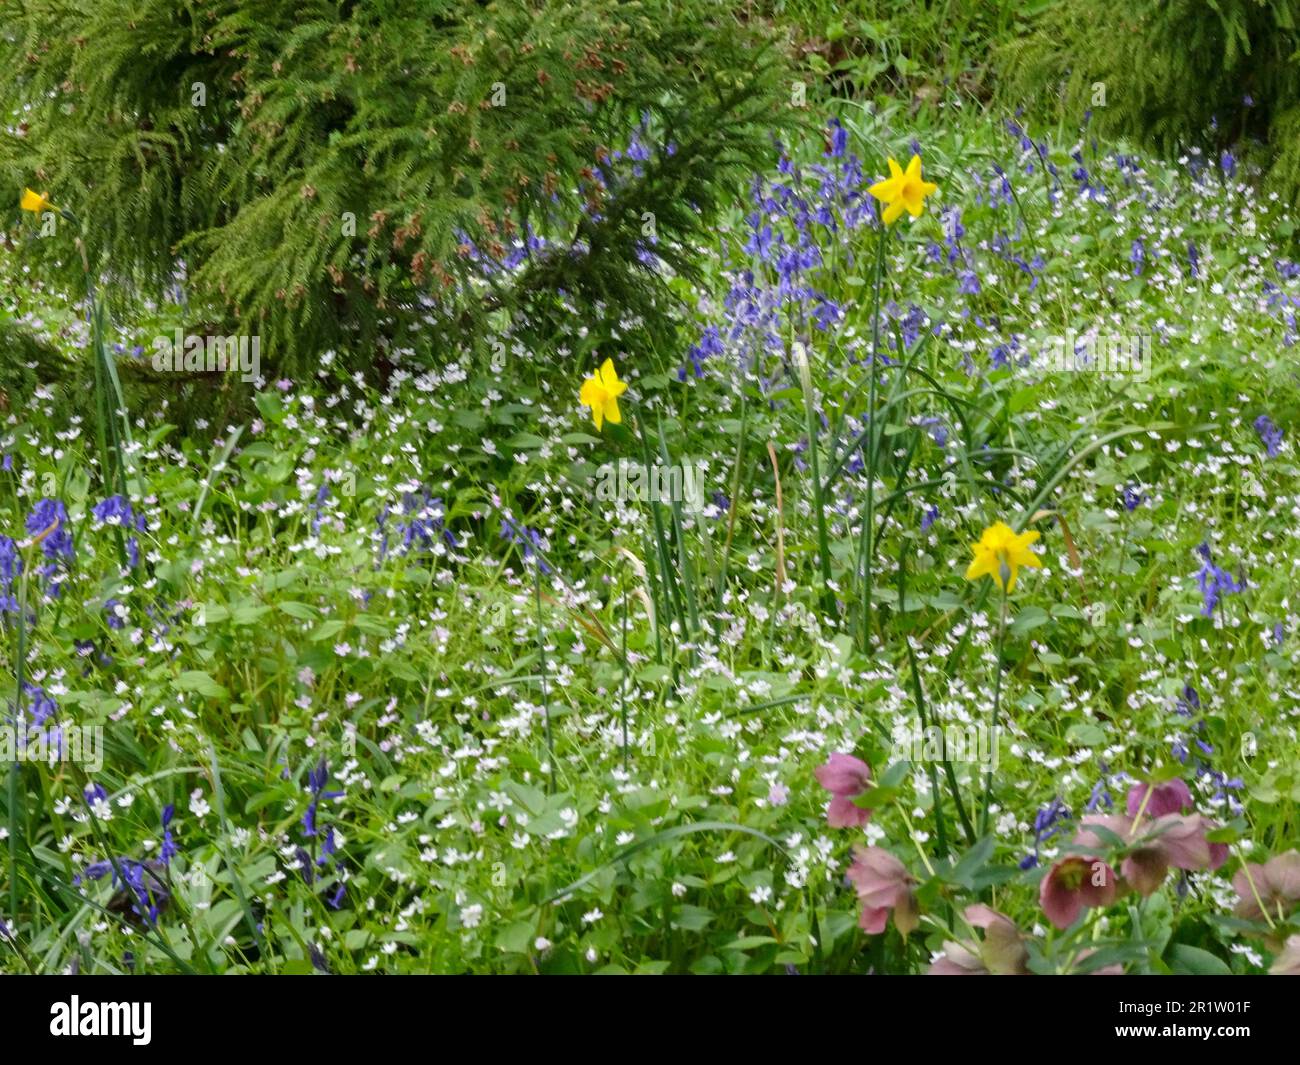 Intimate landscape, natural flowering plant portrait,  of Daffodils glowing in spring sunshine Stock Photo